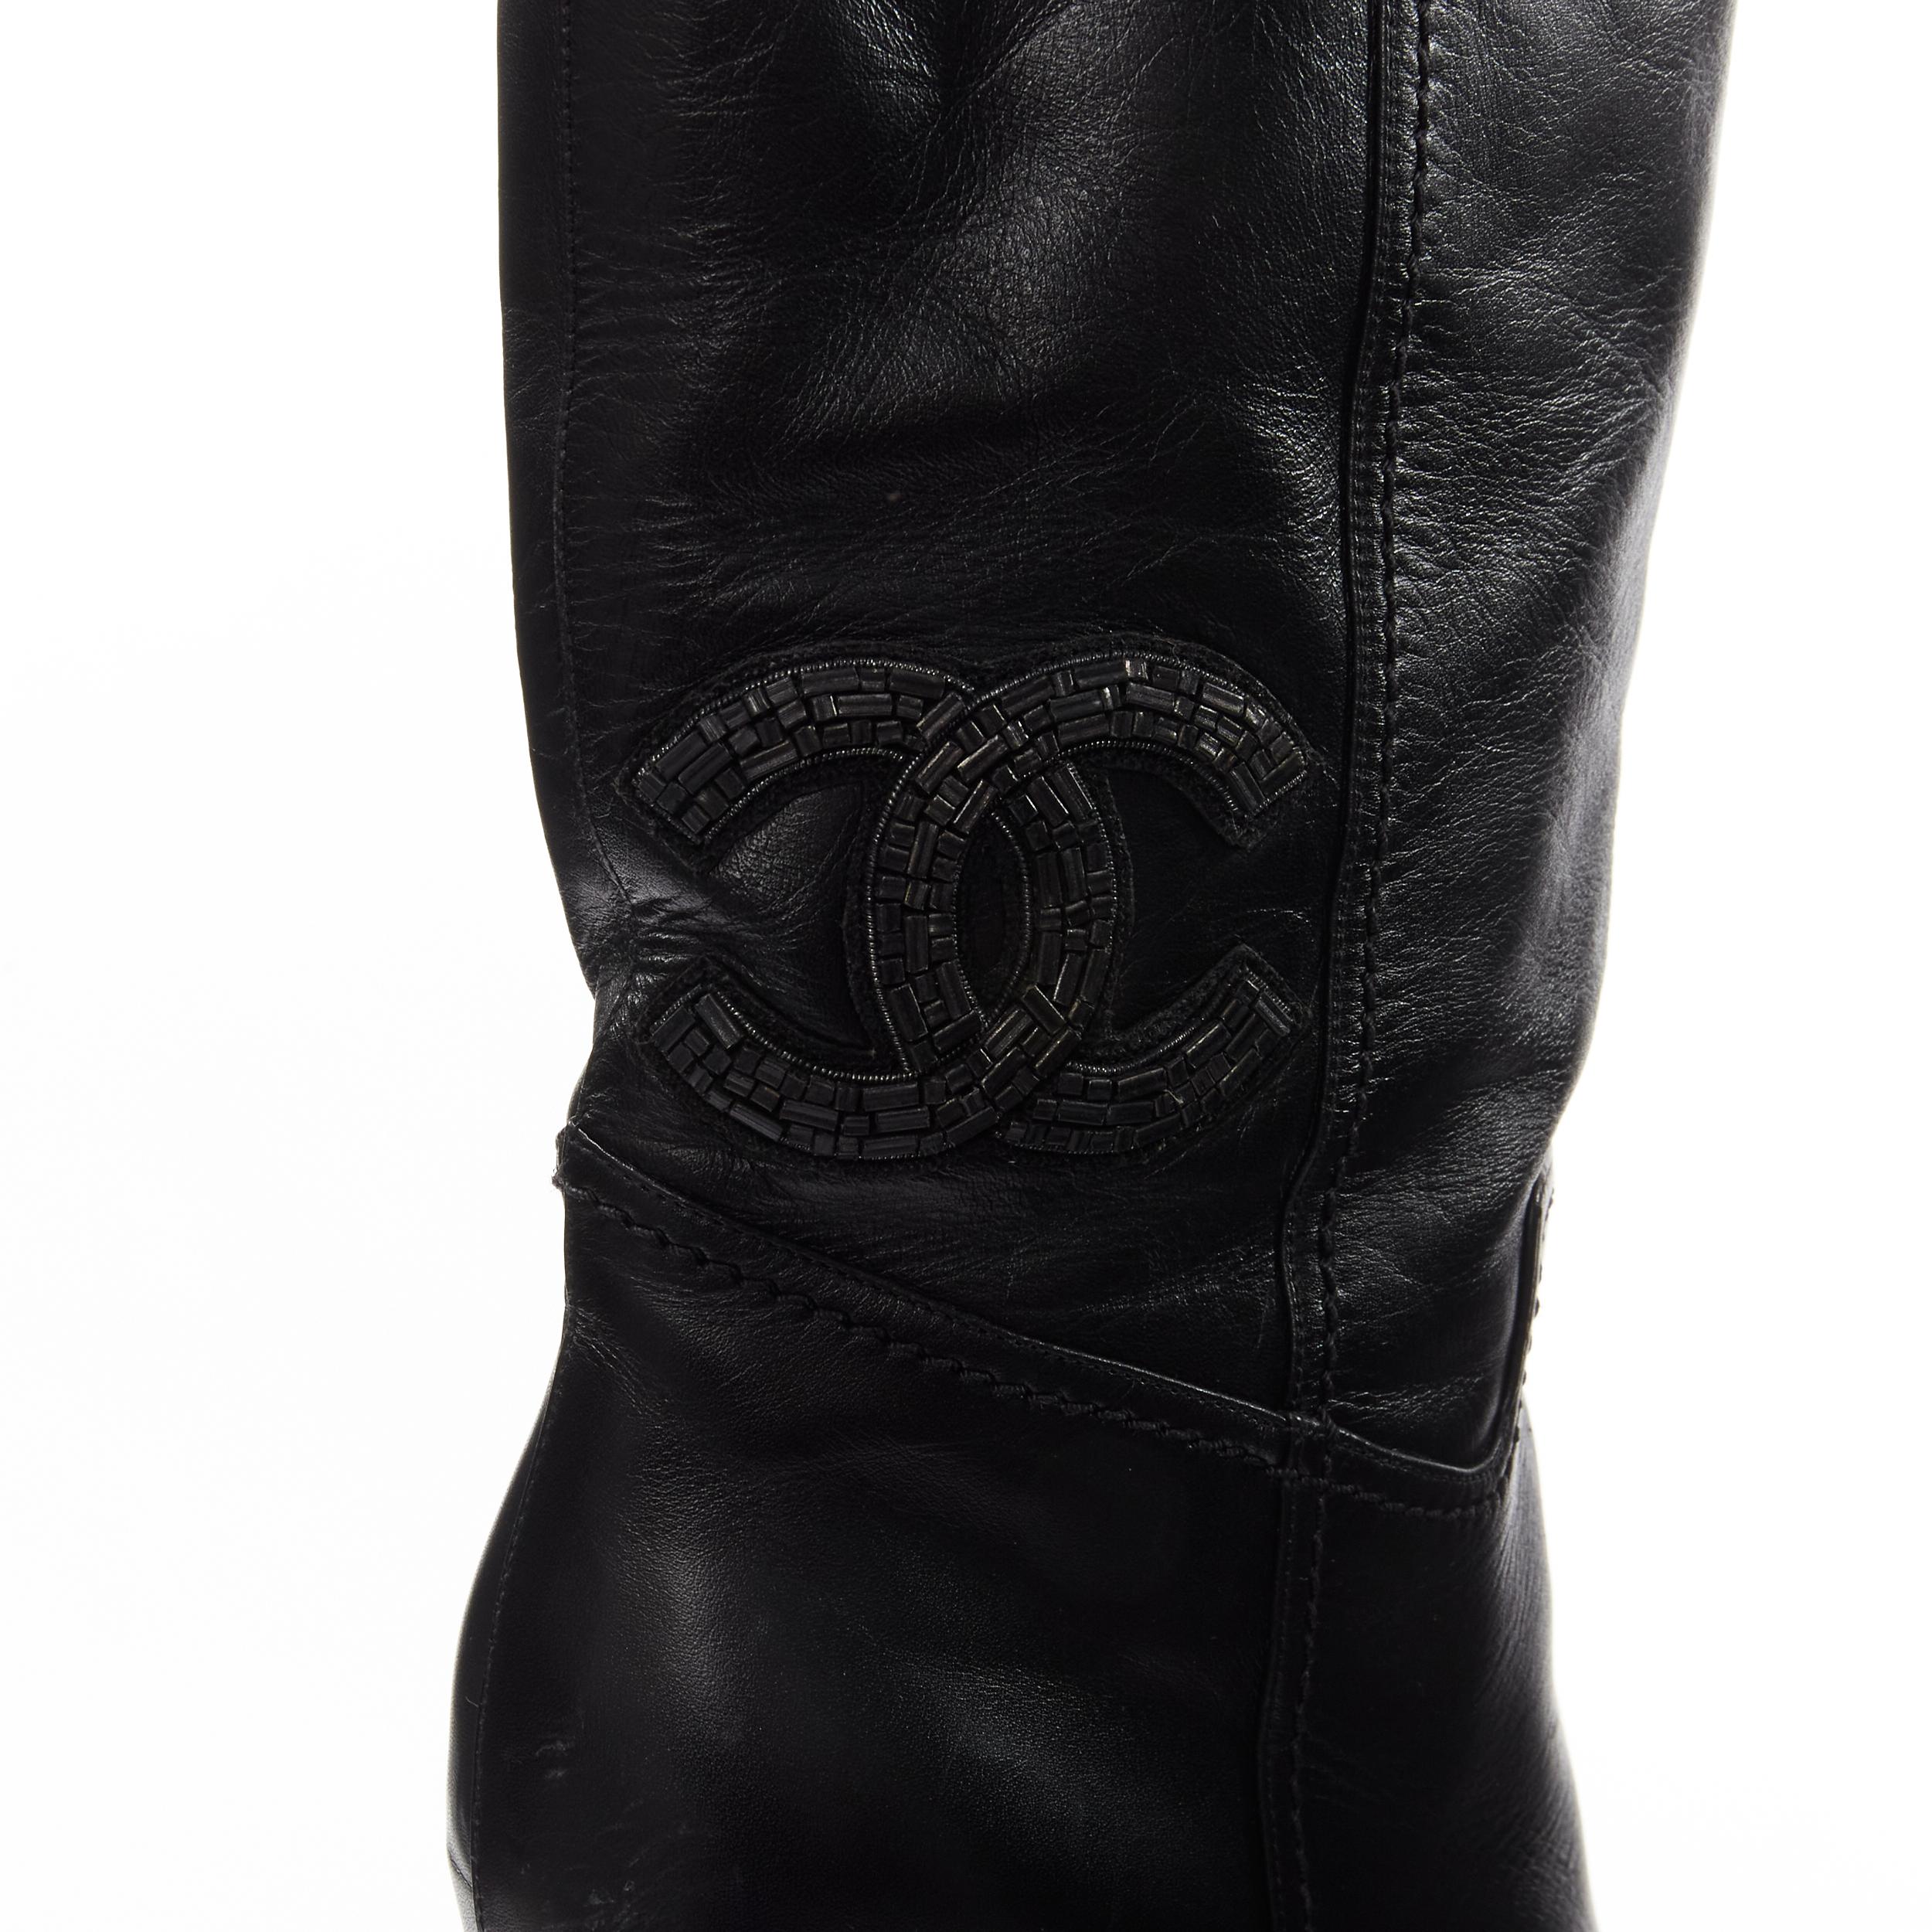 CHANEL CC logo bead embellishment black leather wedge heeled boots EU38
Reference: GIYG/A00274
Brand: Chanel
Designer: Karl Lagerfeld
Material: Leather
Color: Black
Pattern: Solid
Closure: Pull On
Lining: Black Fabric
Made in: